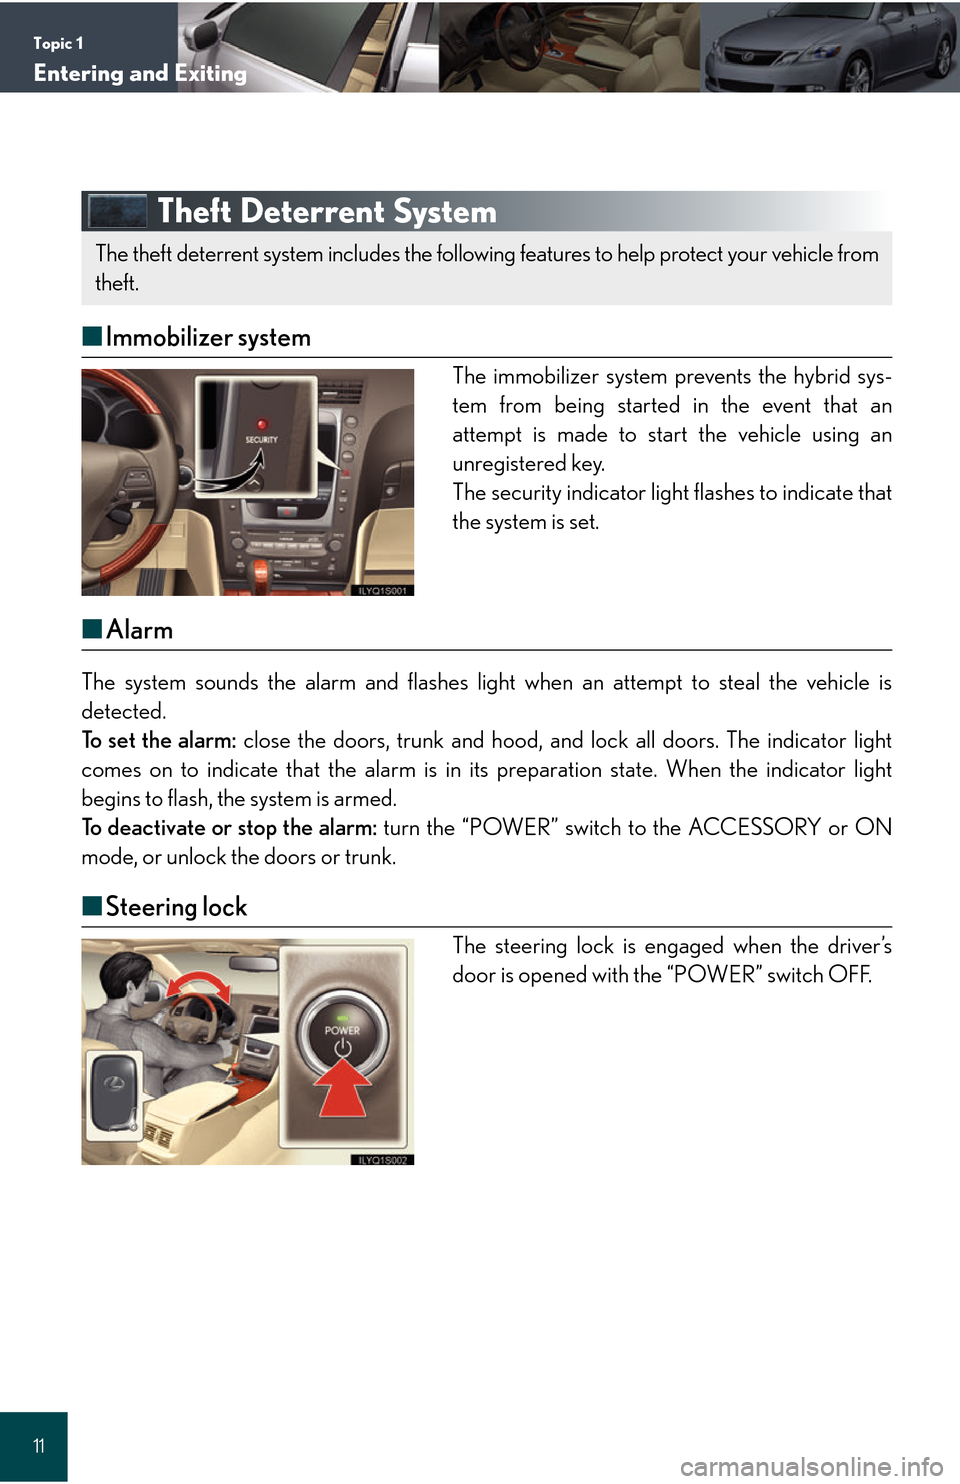 Lexus GS450h 2008  Using the audio system / LEXUS 2008 GS450H QUICK GUIDE OWNERS MANUAL (OM30B13U) Topic 1
Entering and Exiting
11
Theft Deterrent System
■Immobilizer system
The immobilizer system prevents the hybrid sys-
tem from being started in the event that an
attempt is made to start the ve